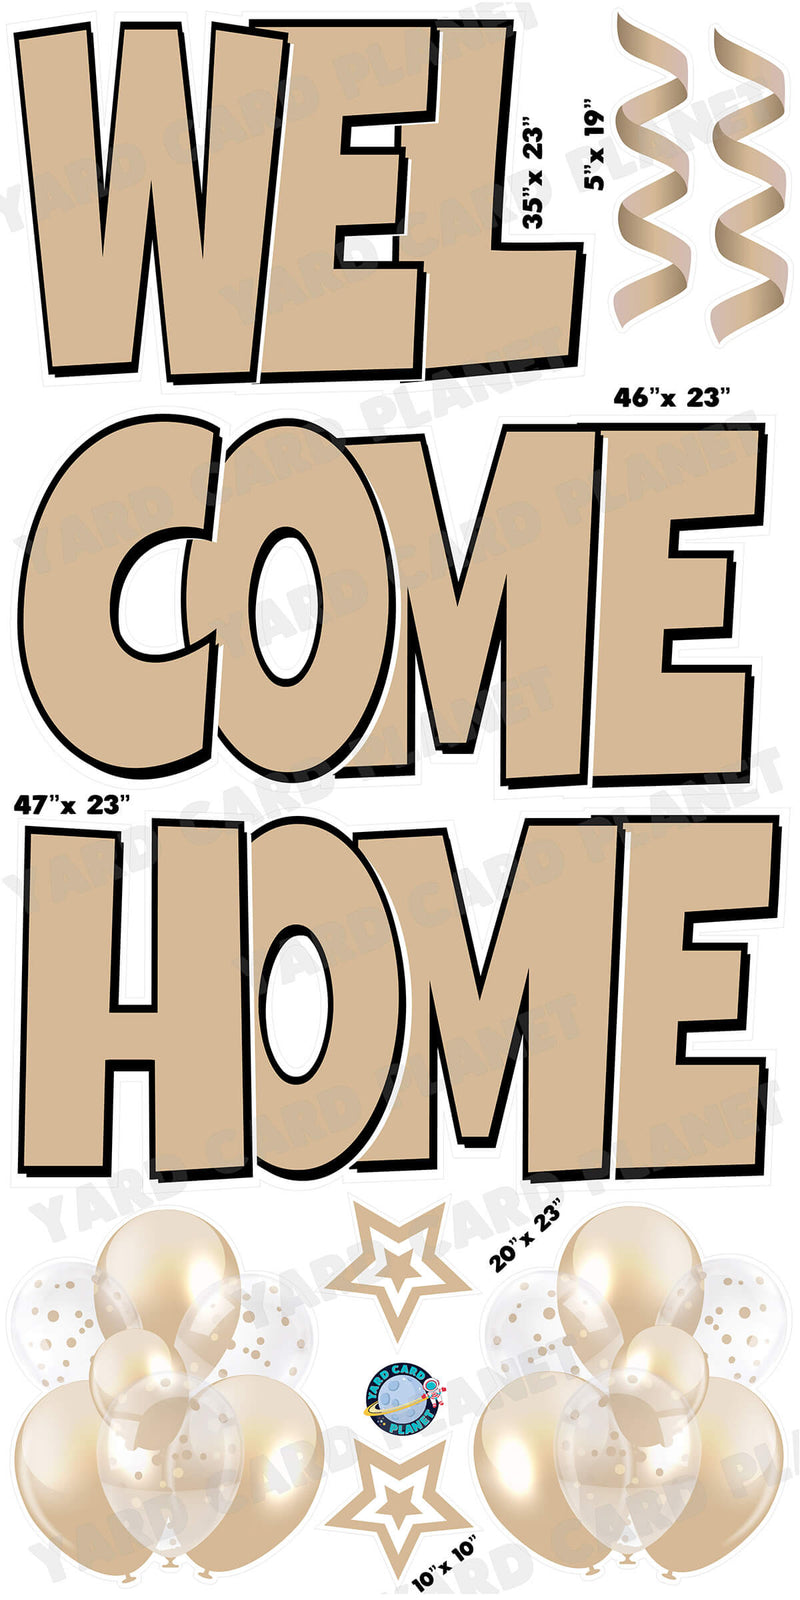 Large 23" Welcome Home Yard Card EZ Quick Sets in Luckiest Guy Font and Flair in Tan Solid Color